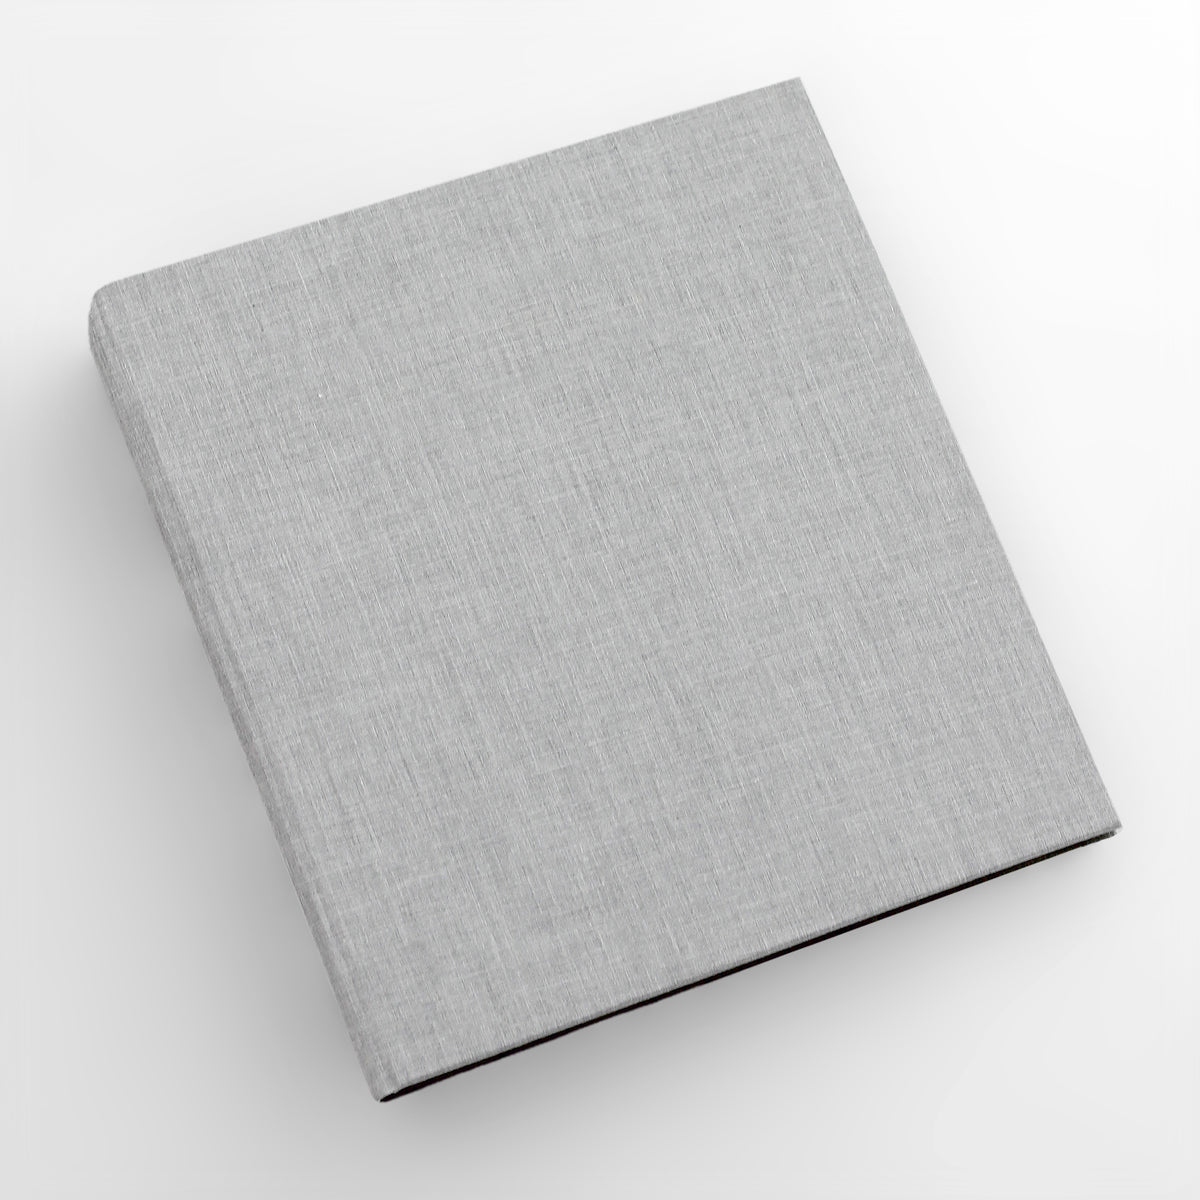 Photo Binder for 5x7 photos | Cover: Dove Gray Linen | Available Personalized